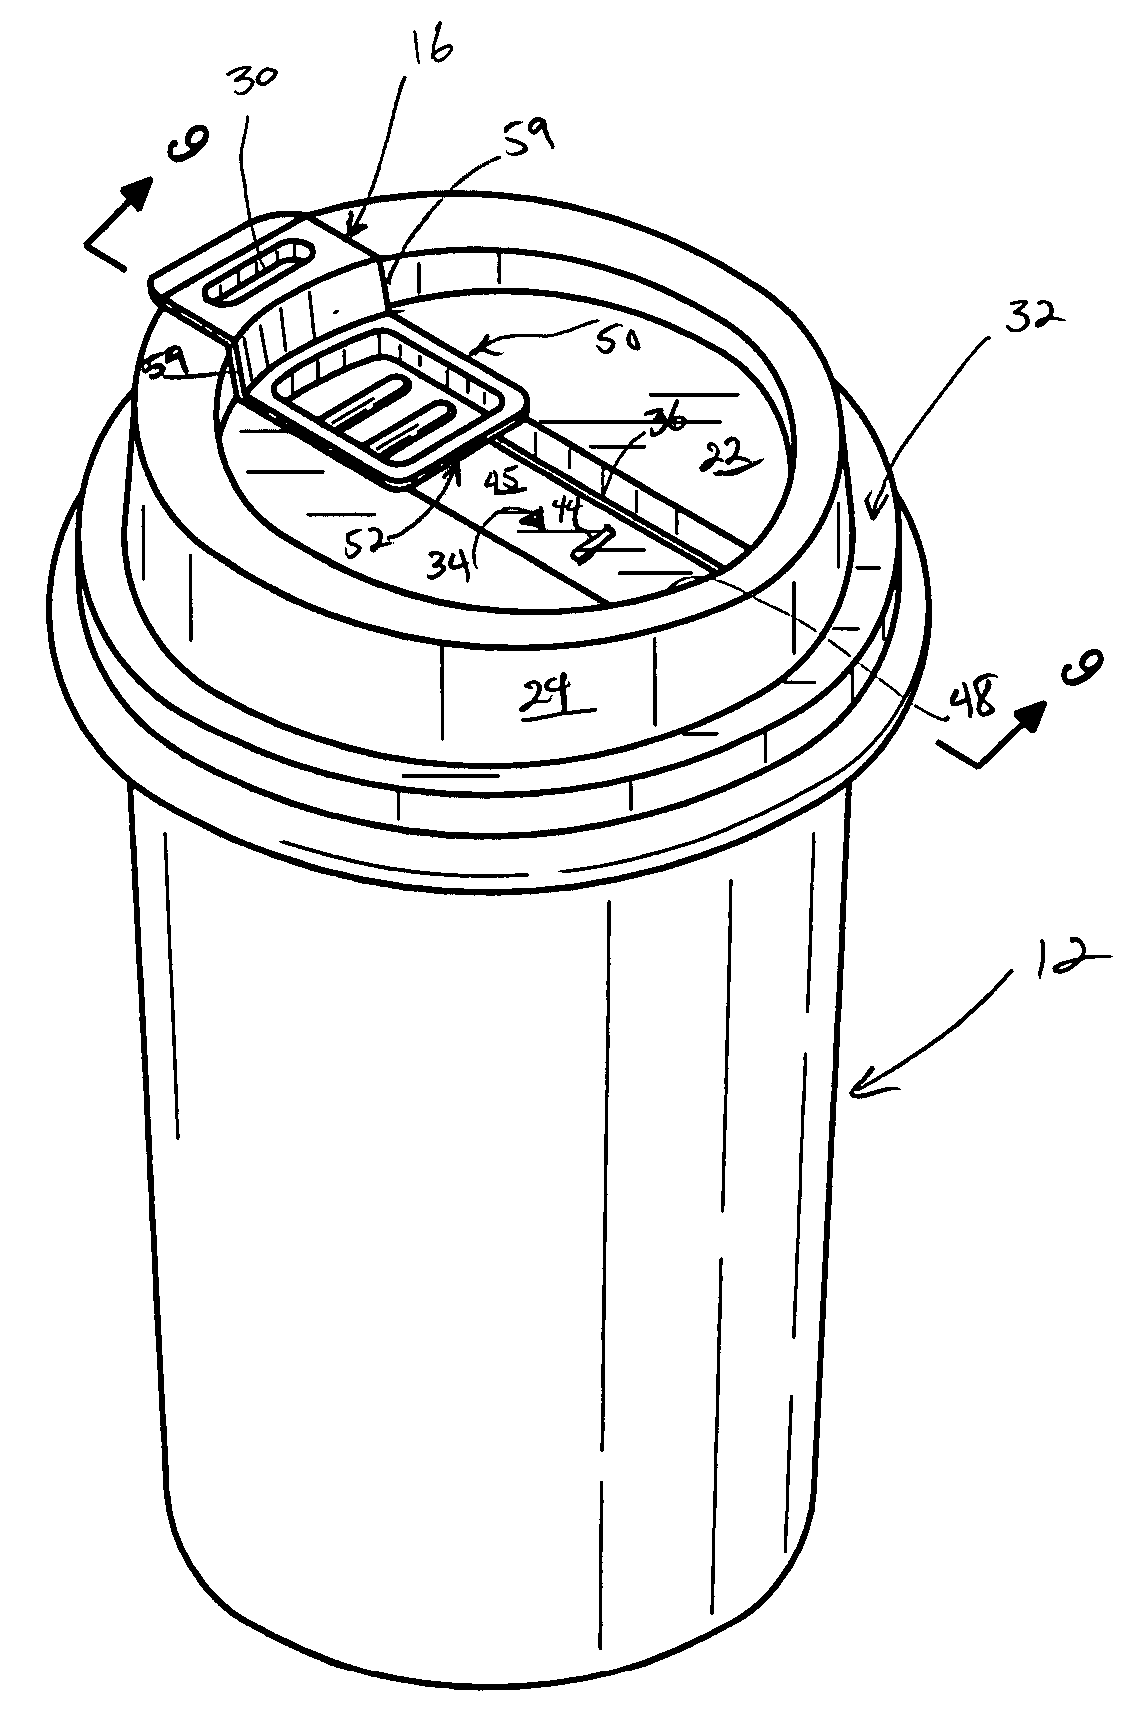 Reclosable container lid